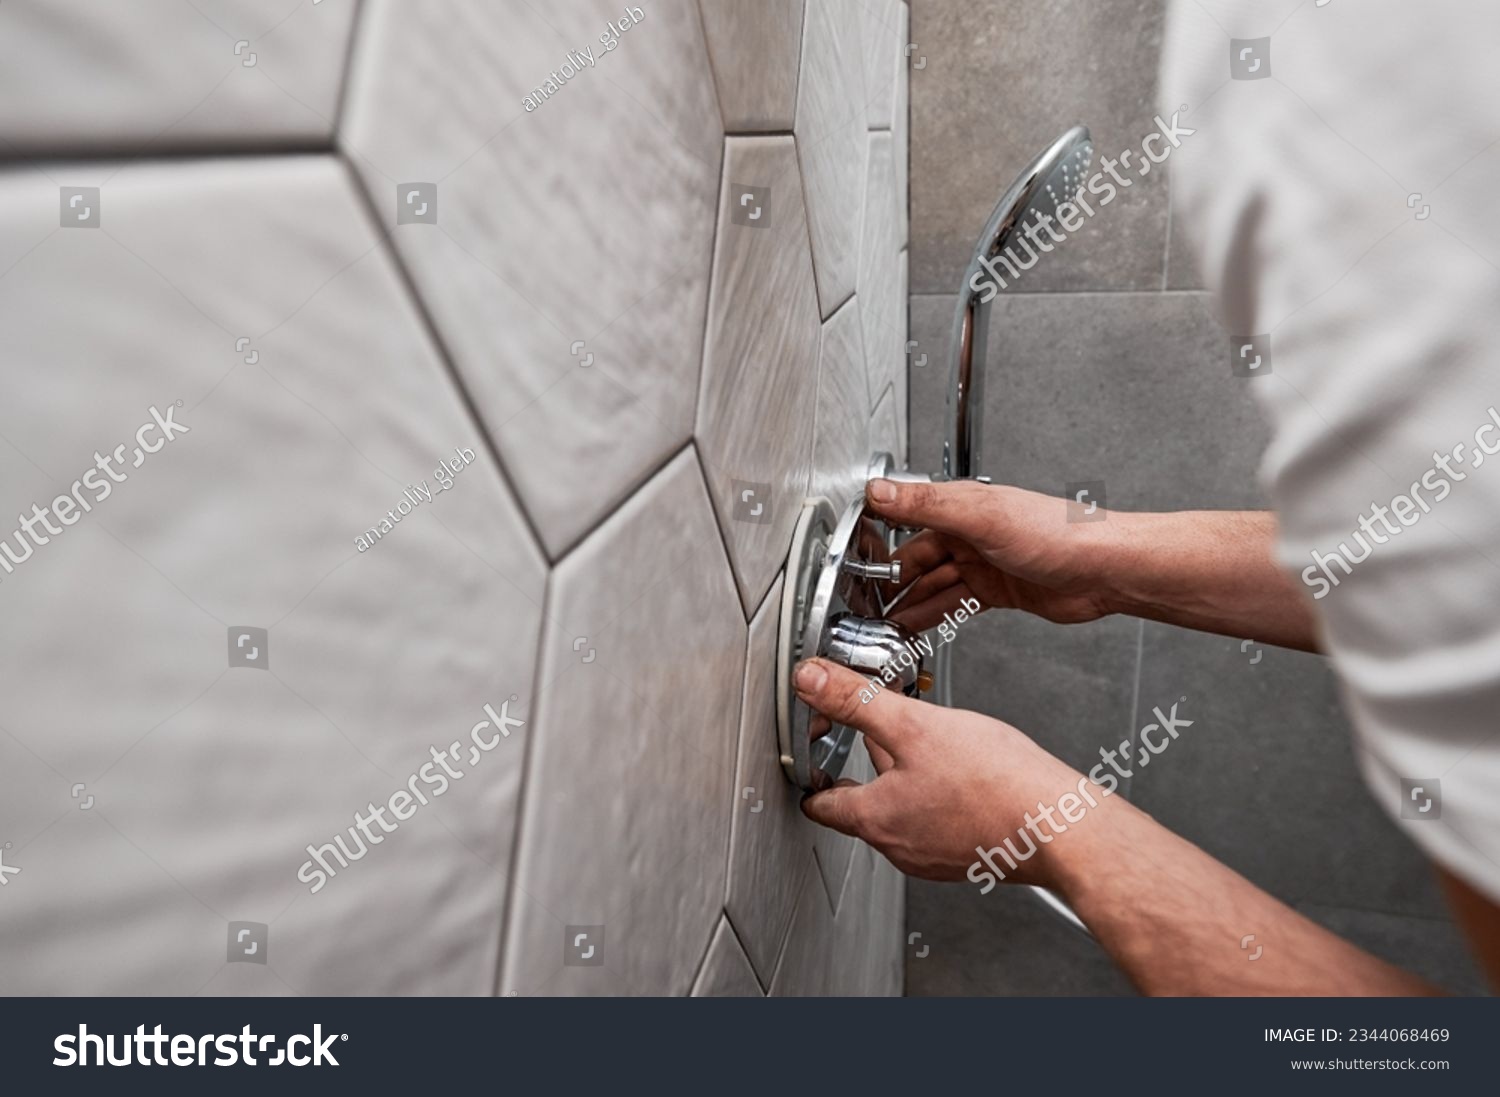 Close up of man standing by the wall with ceramic tile and installing shower faucet with metal handle in apartment. Male plumber working on bathroom renovation at home. Plumbing works concept. #2344068469